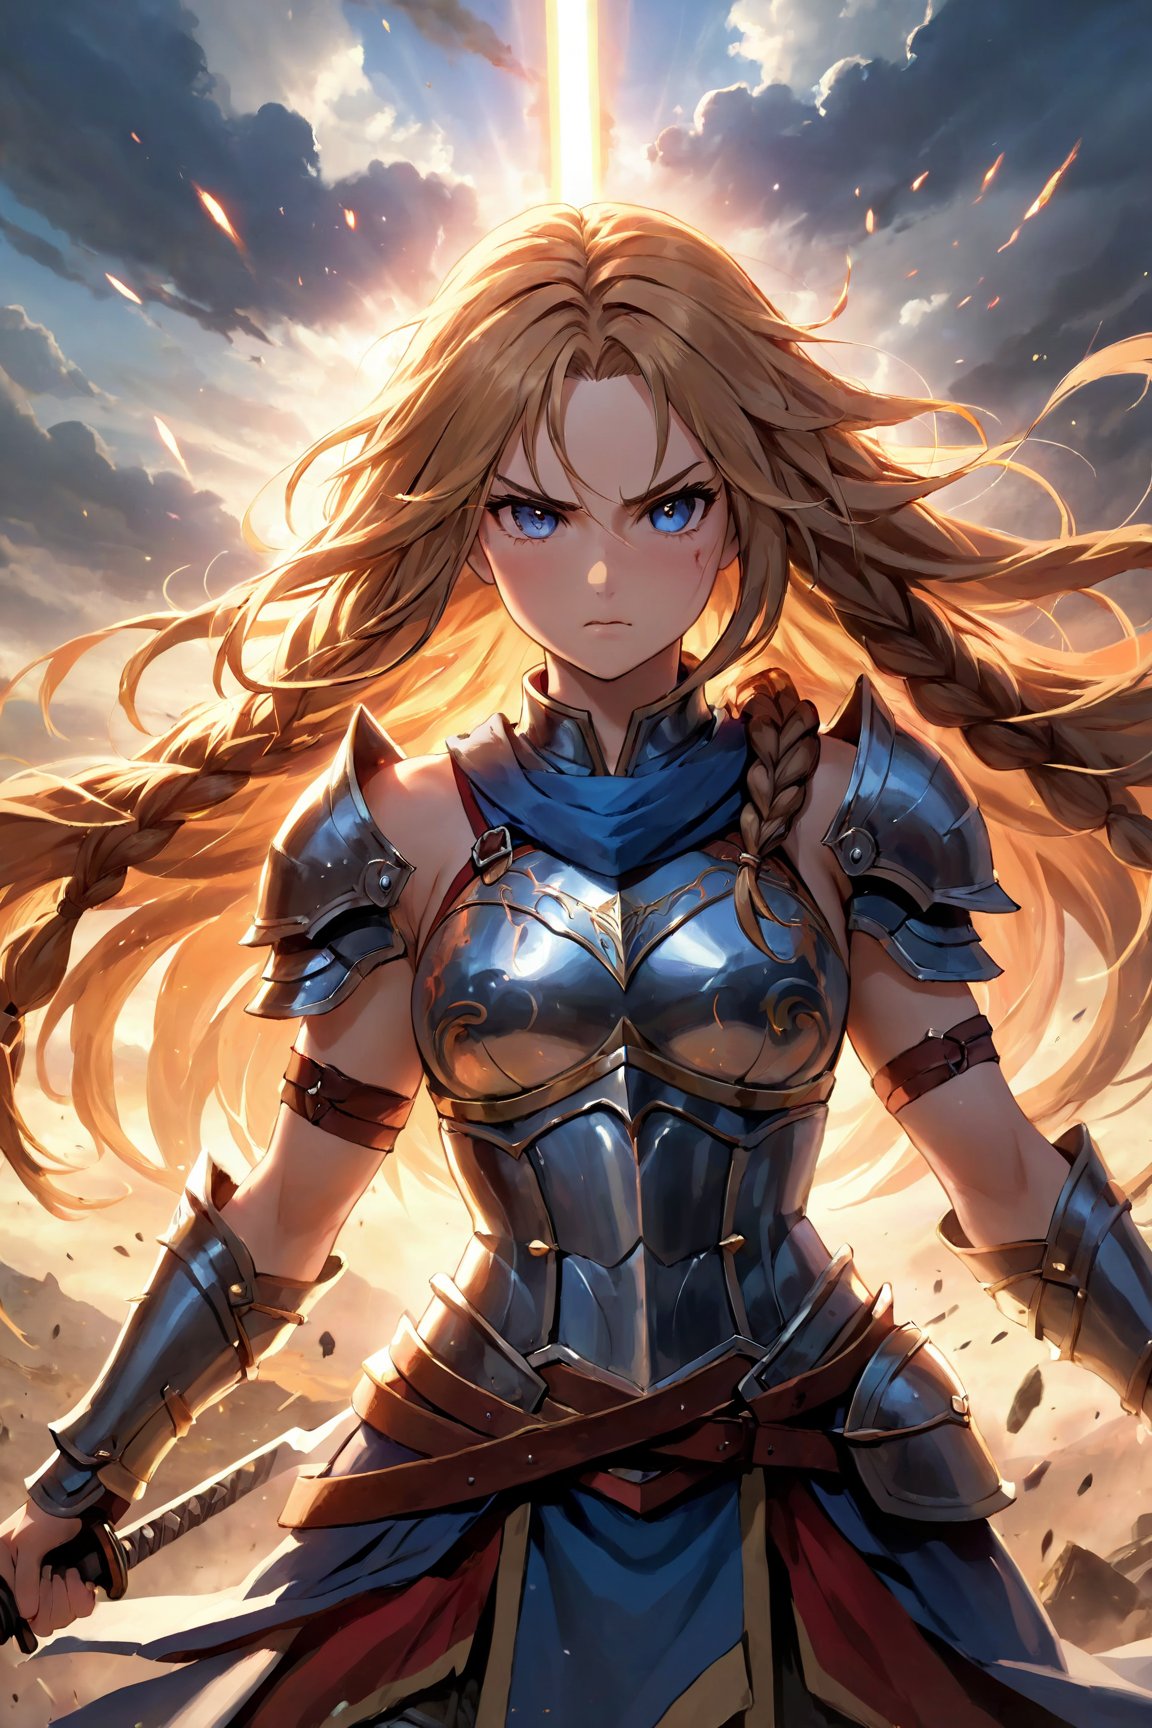 (best quality,4k,8k,highres,masterpiece:1.2),ultra-detailed,warrior,1girl,helmet,armor,sword,strong,brave,heroic,possession of power,determination,courage,adventure,dauntless expression,intense gaze,fit and muscular physique,confident posture,fighting stance,background of a battlefield,dark and ominous atmosphere,streaks of sunlight piercing through the clouds,dramatic lighting,dusty smoke,gritty texture,vivid colors,contrasting shadows,war cries and battle sounds,energetic movement,swift and precise sword strikes,explosions and debris,emotionally charged,chaotic battlefield,undying spirit,defender of justice,mysterious aura,powerful aura emanating from the warrior,girl with long flowing hair,braided hair,warrior's scars,a symbol of strength and resilience,deep and piercing eyes,sharp facial features,dirt and blood stains on the armor,determination and resolve in her eyes,heroic wind blowing through her hair,dynamic composition,epic and grand scale of the battle,unstoppable force,legend in the making,marks of victories on her armor,ultimate warrior,legendary warrior.